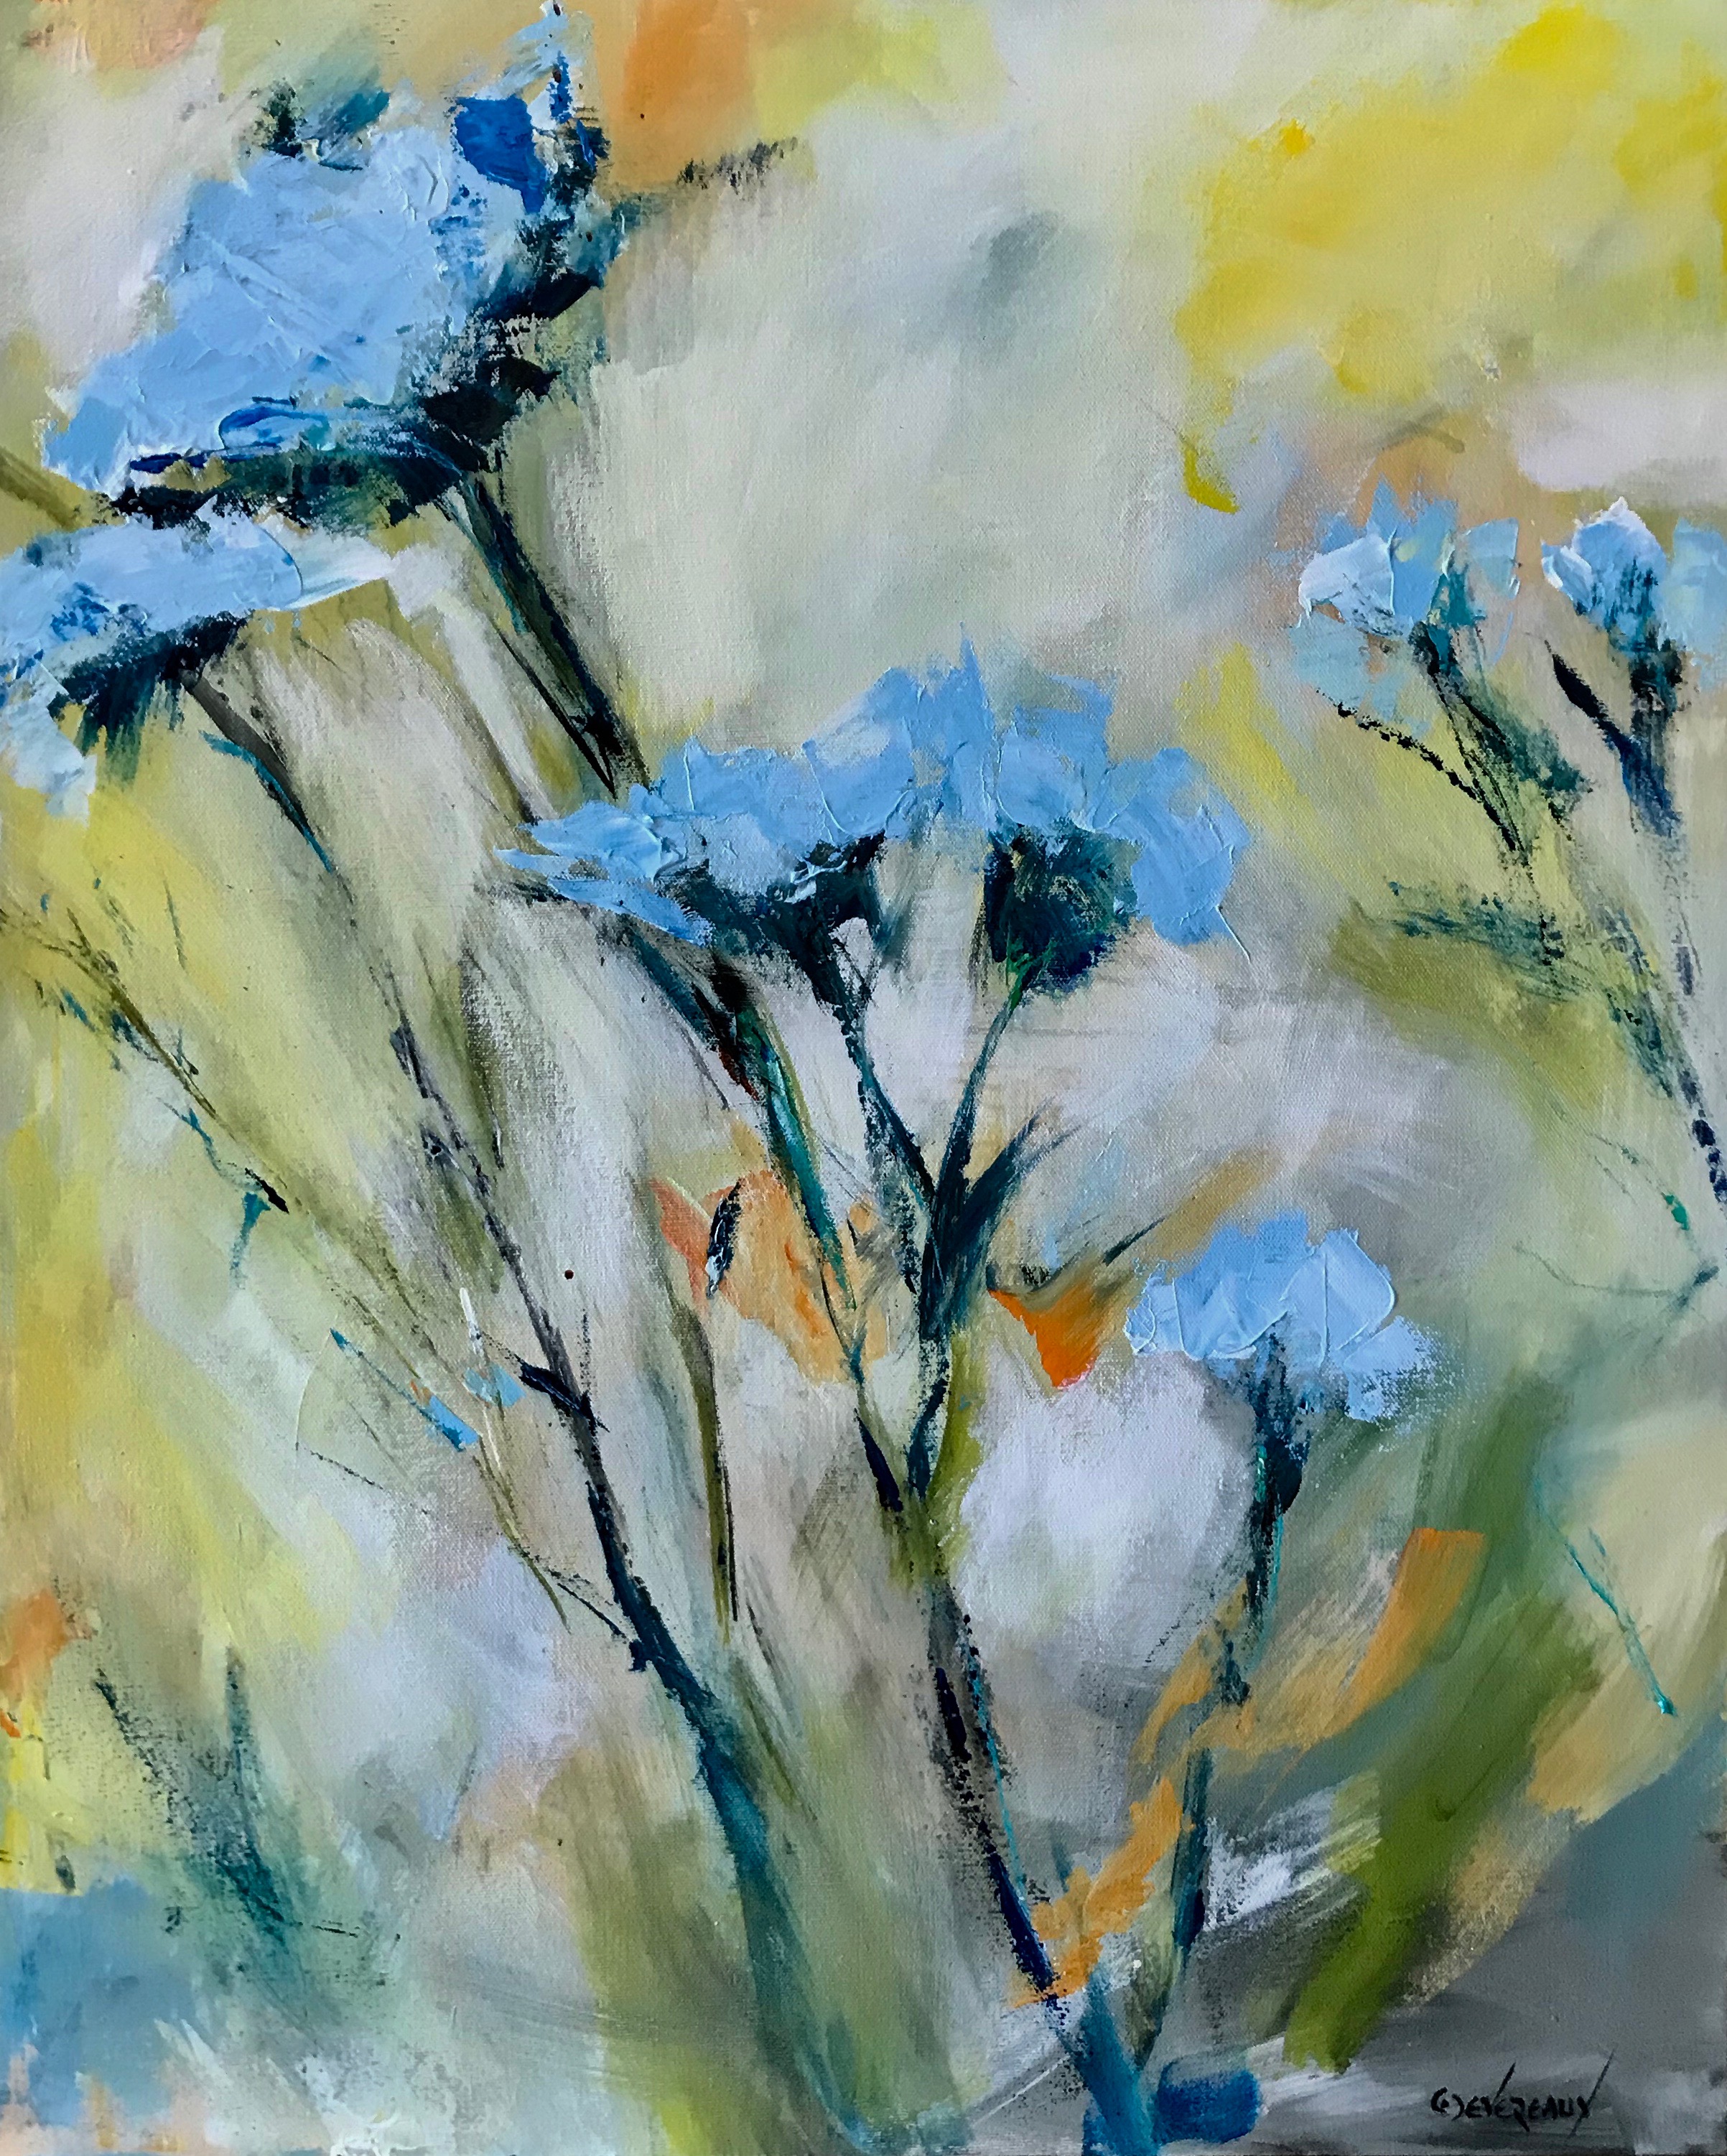 'A Touch of Sunshine' 24x30 in  contemporary modern flower, floral painting by Cher Devereaux on stretched canvas.